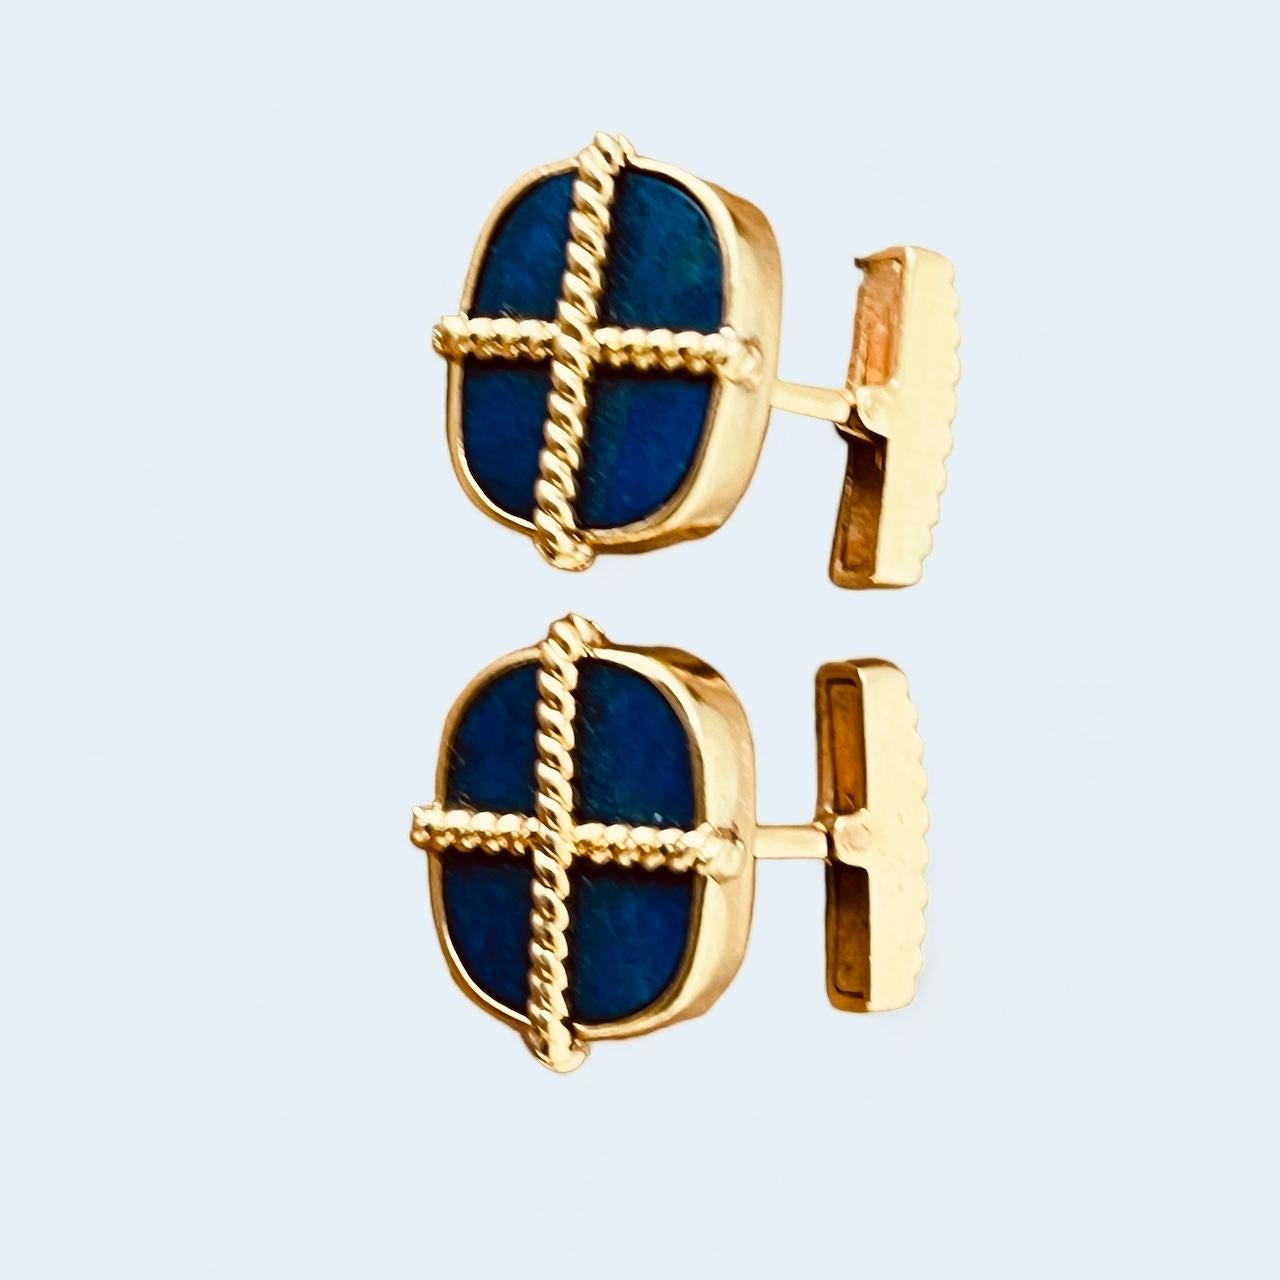 A Pair of 18ct Yellow Gold and Lapis Lazuli Cufflinks. Circa 1970's. For Sale 12